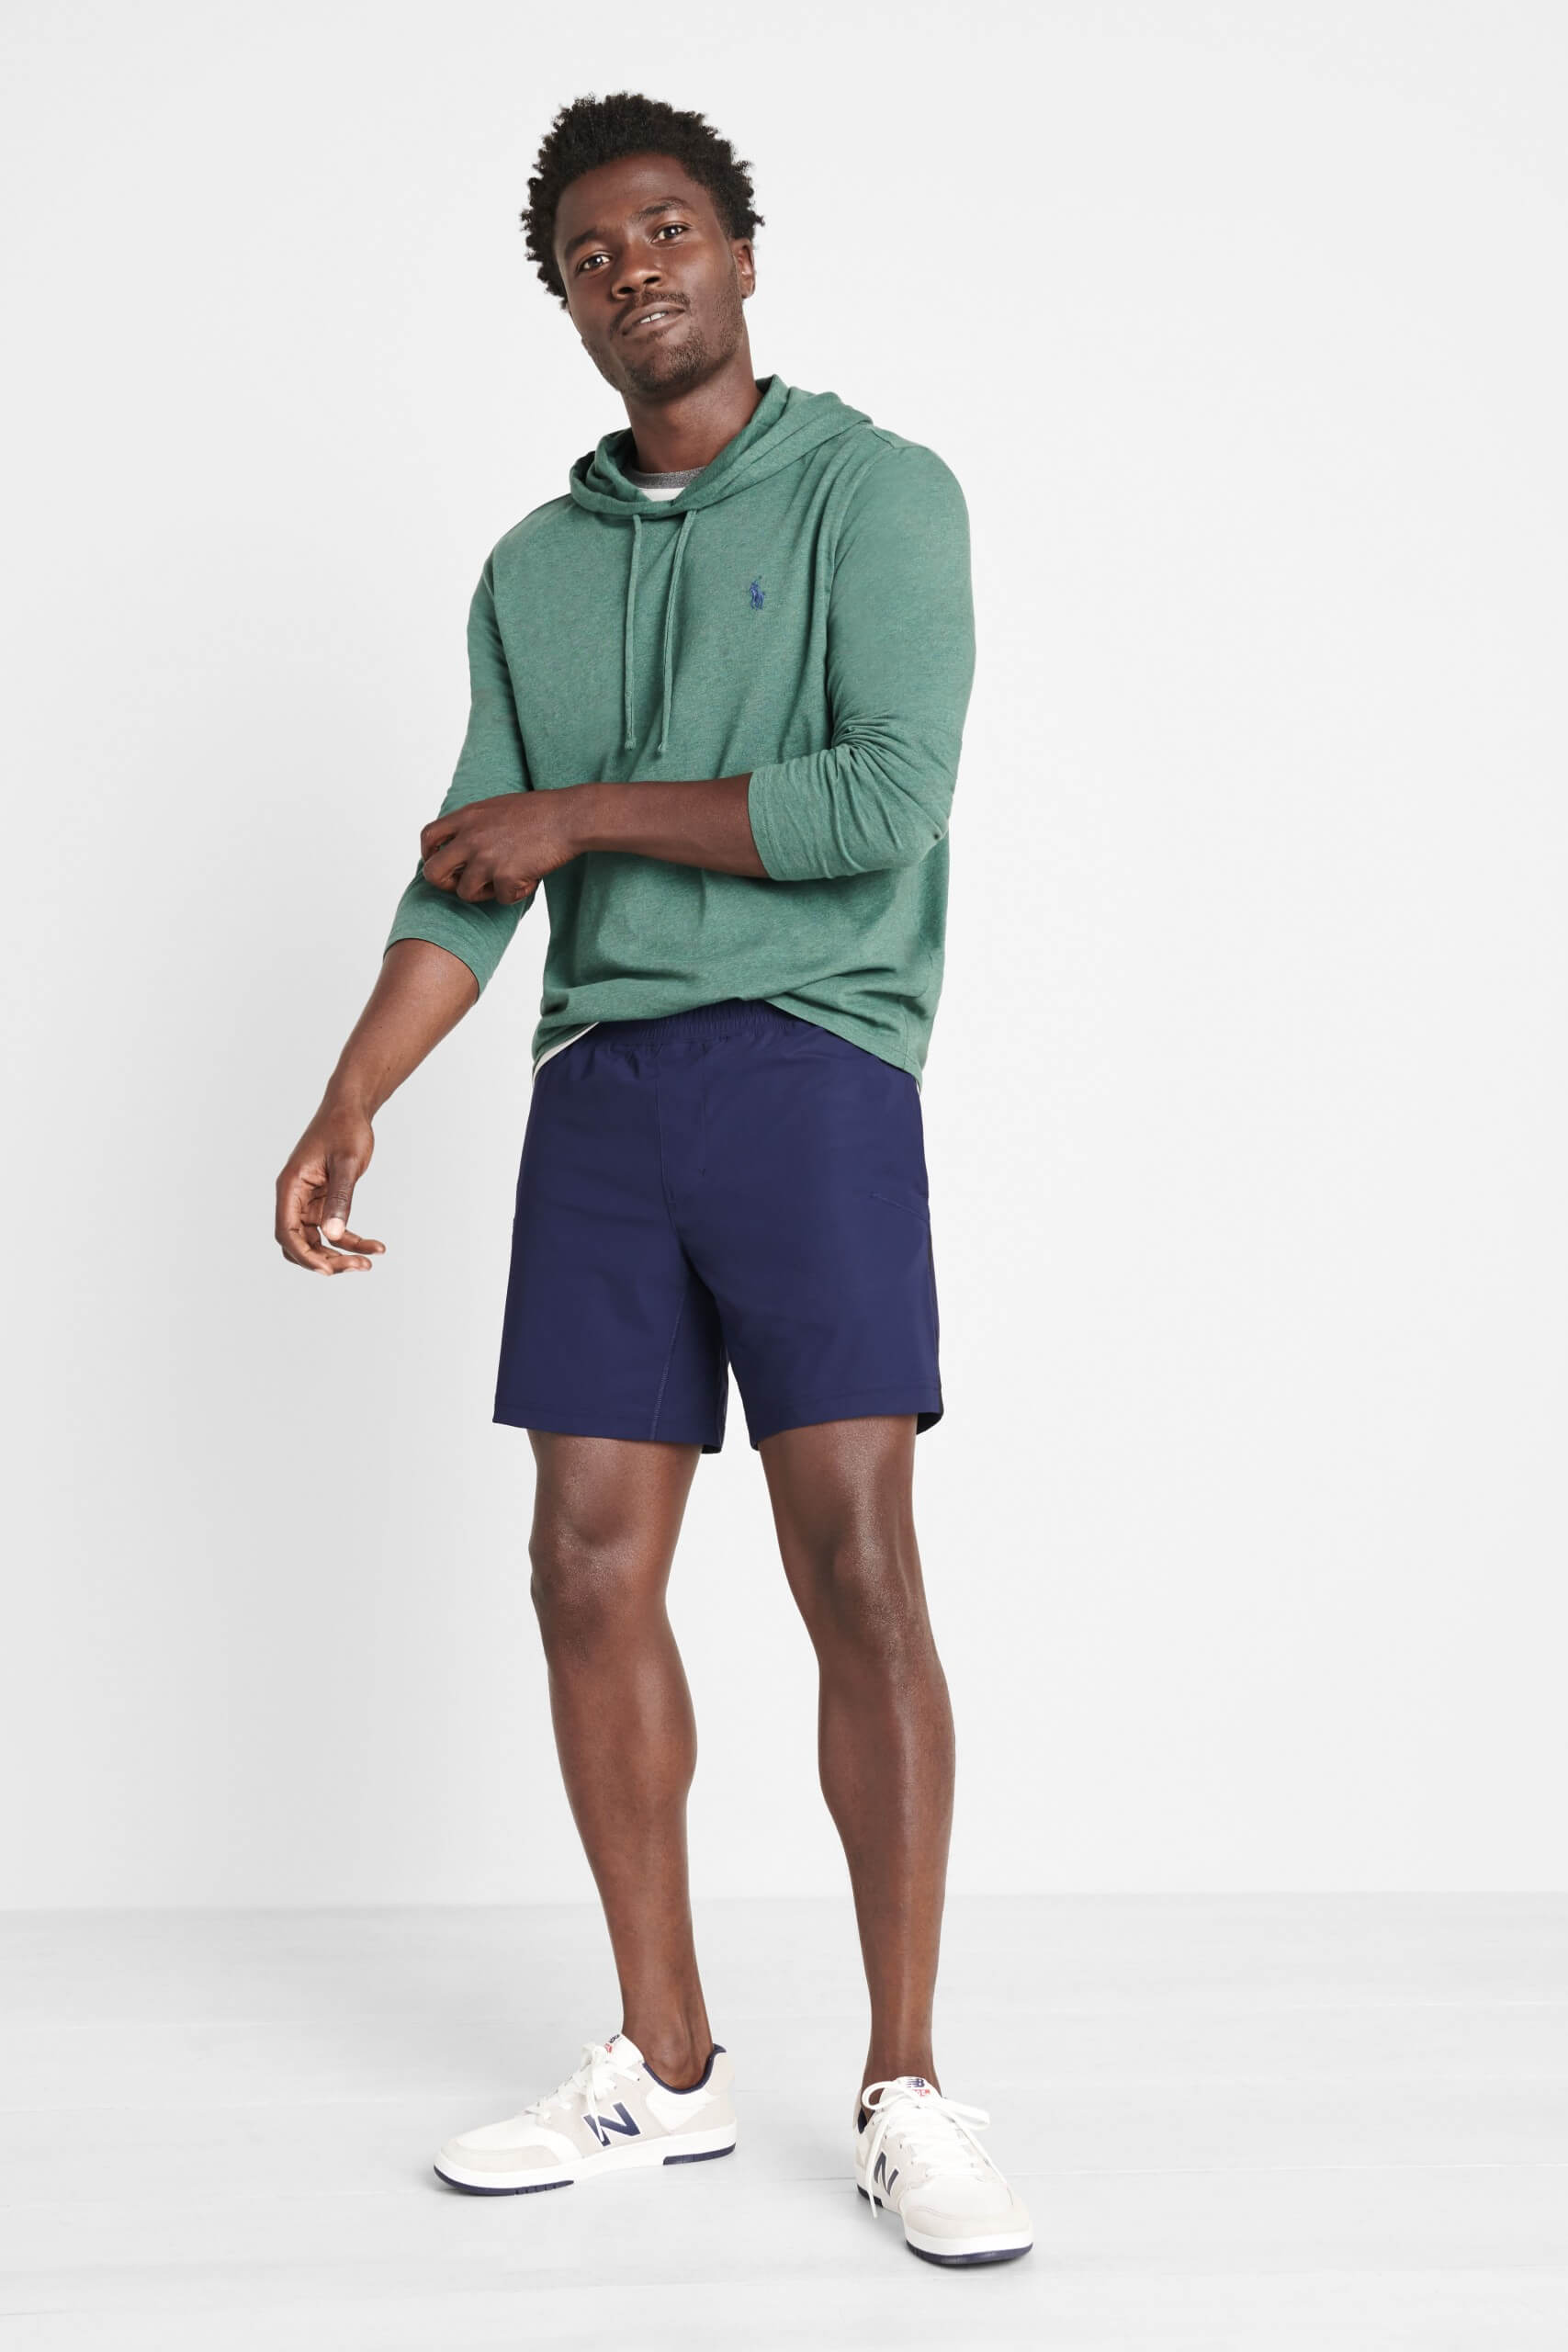 The Best Stylist-Fitting Shorts for Your Build | Stitch Fix Men